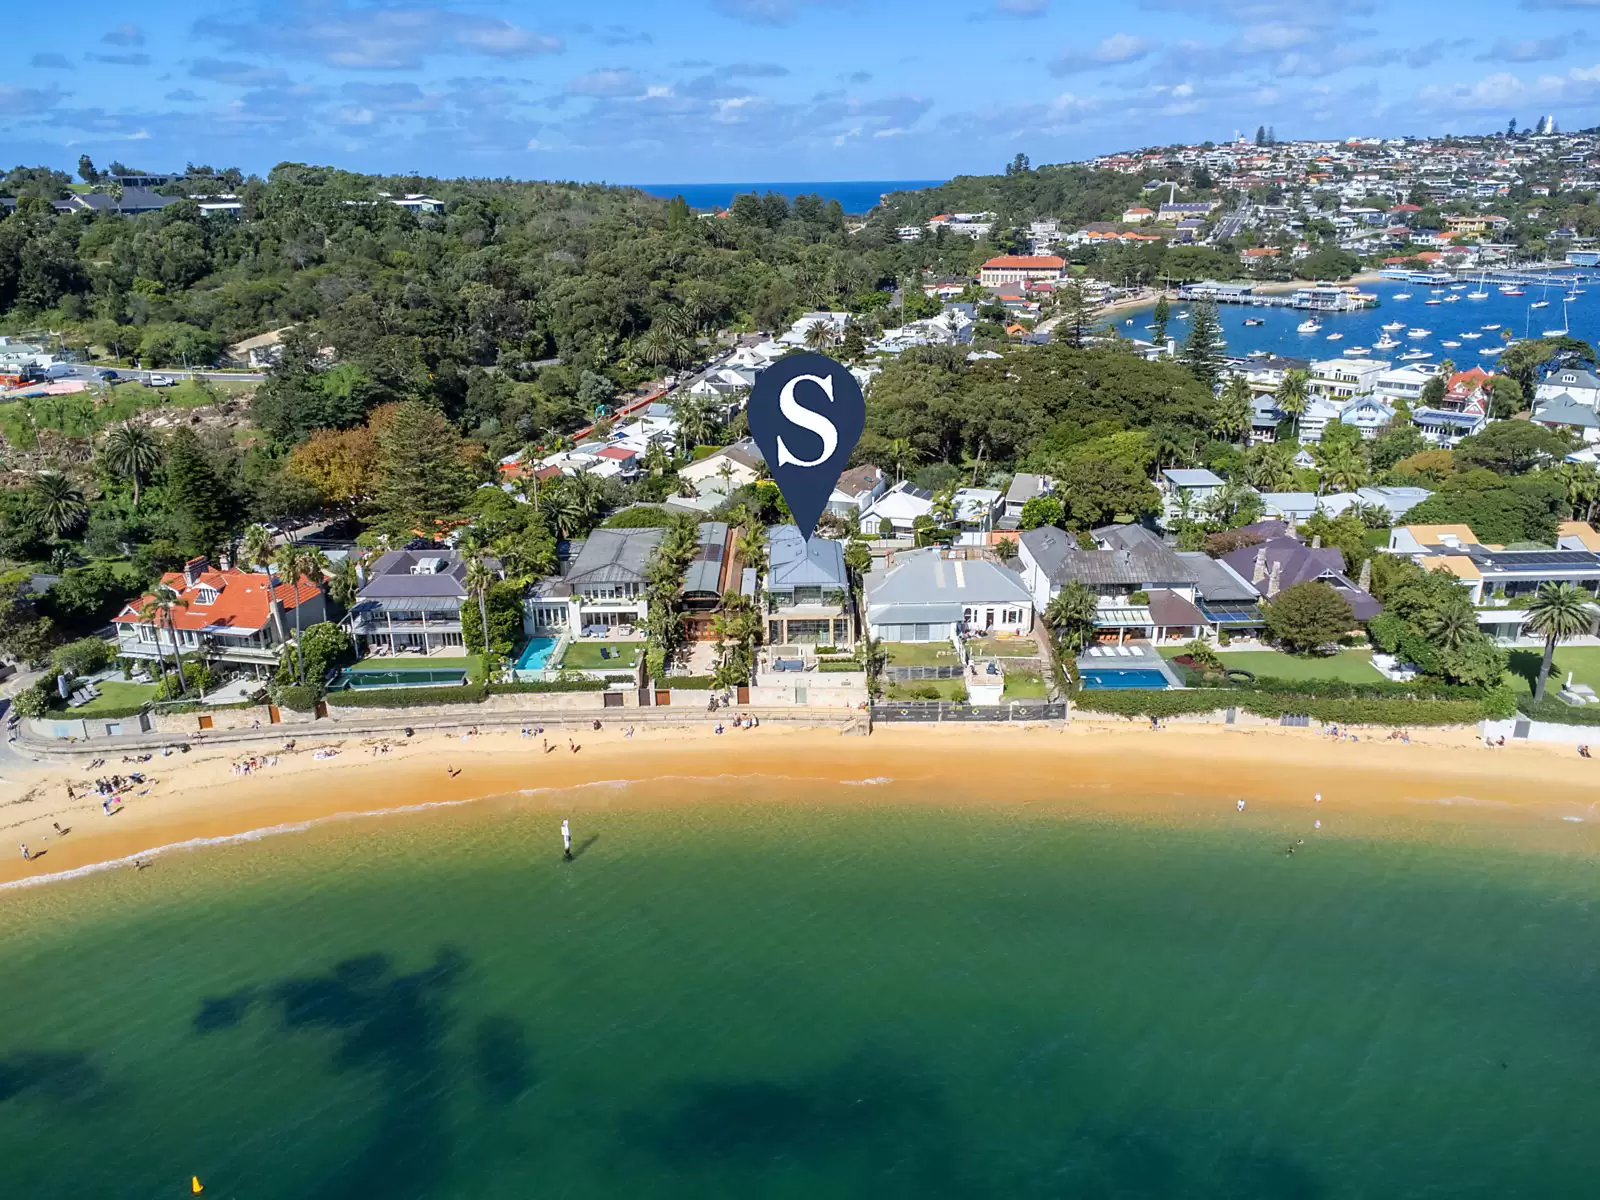 Photo #3: 13 Victoria Street, Watsons Bay - Sold by Sydney Sotheby's International Realty